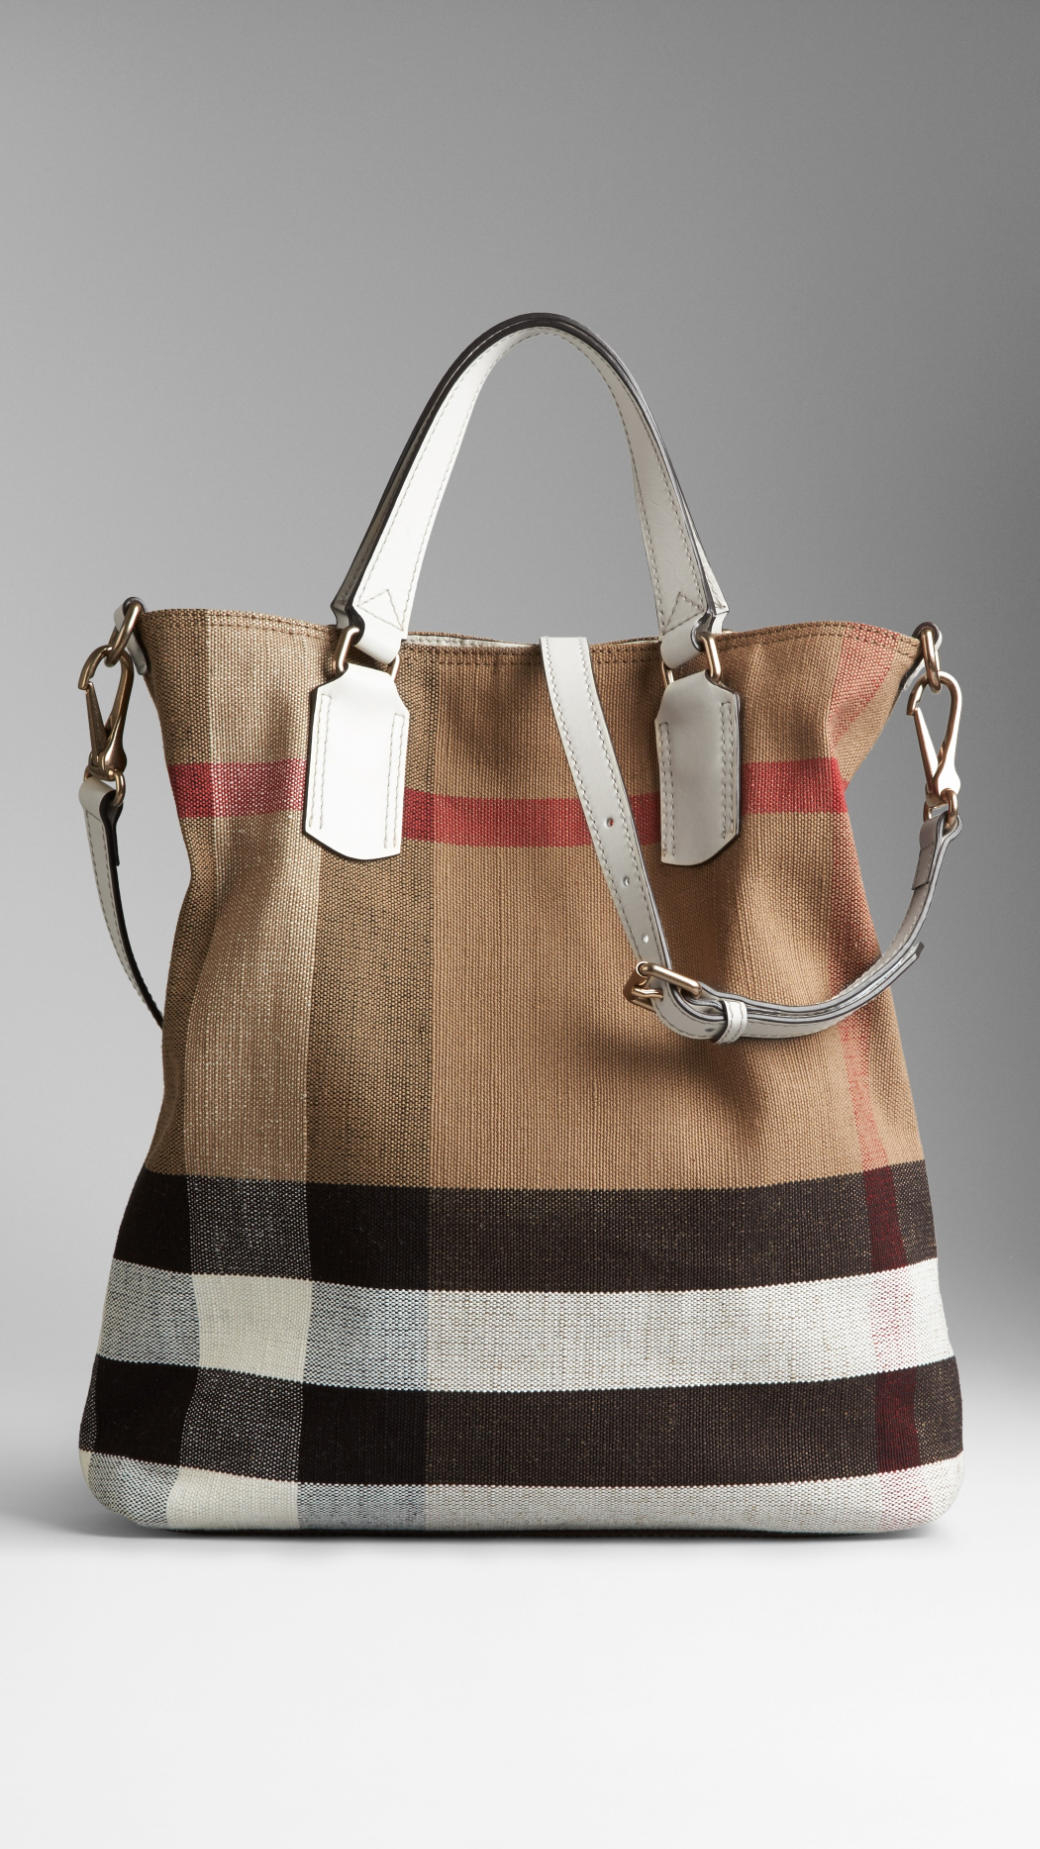 Burberry Medium Canvas Check Tote Bag in Brown | Lyst